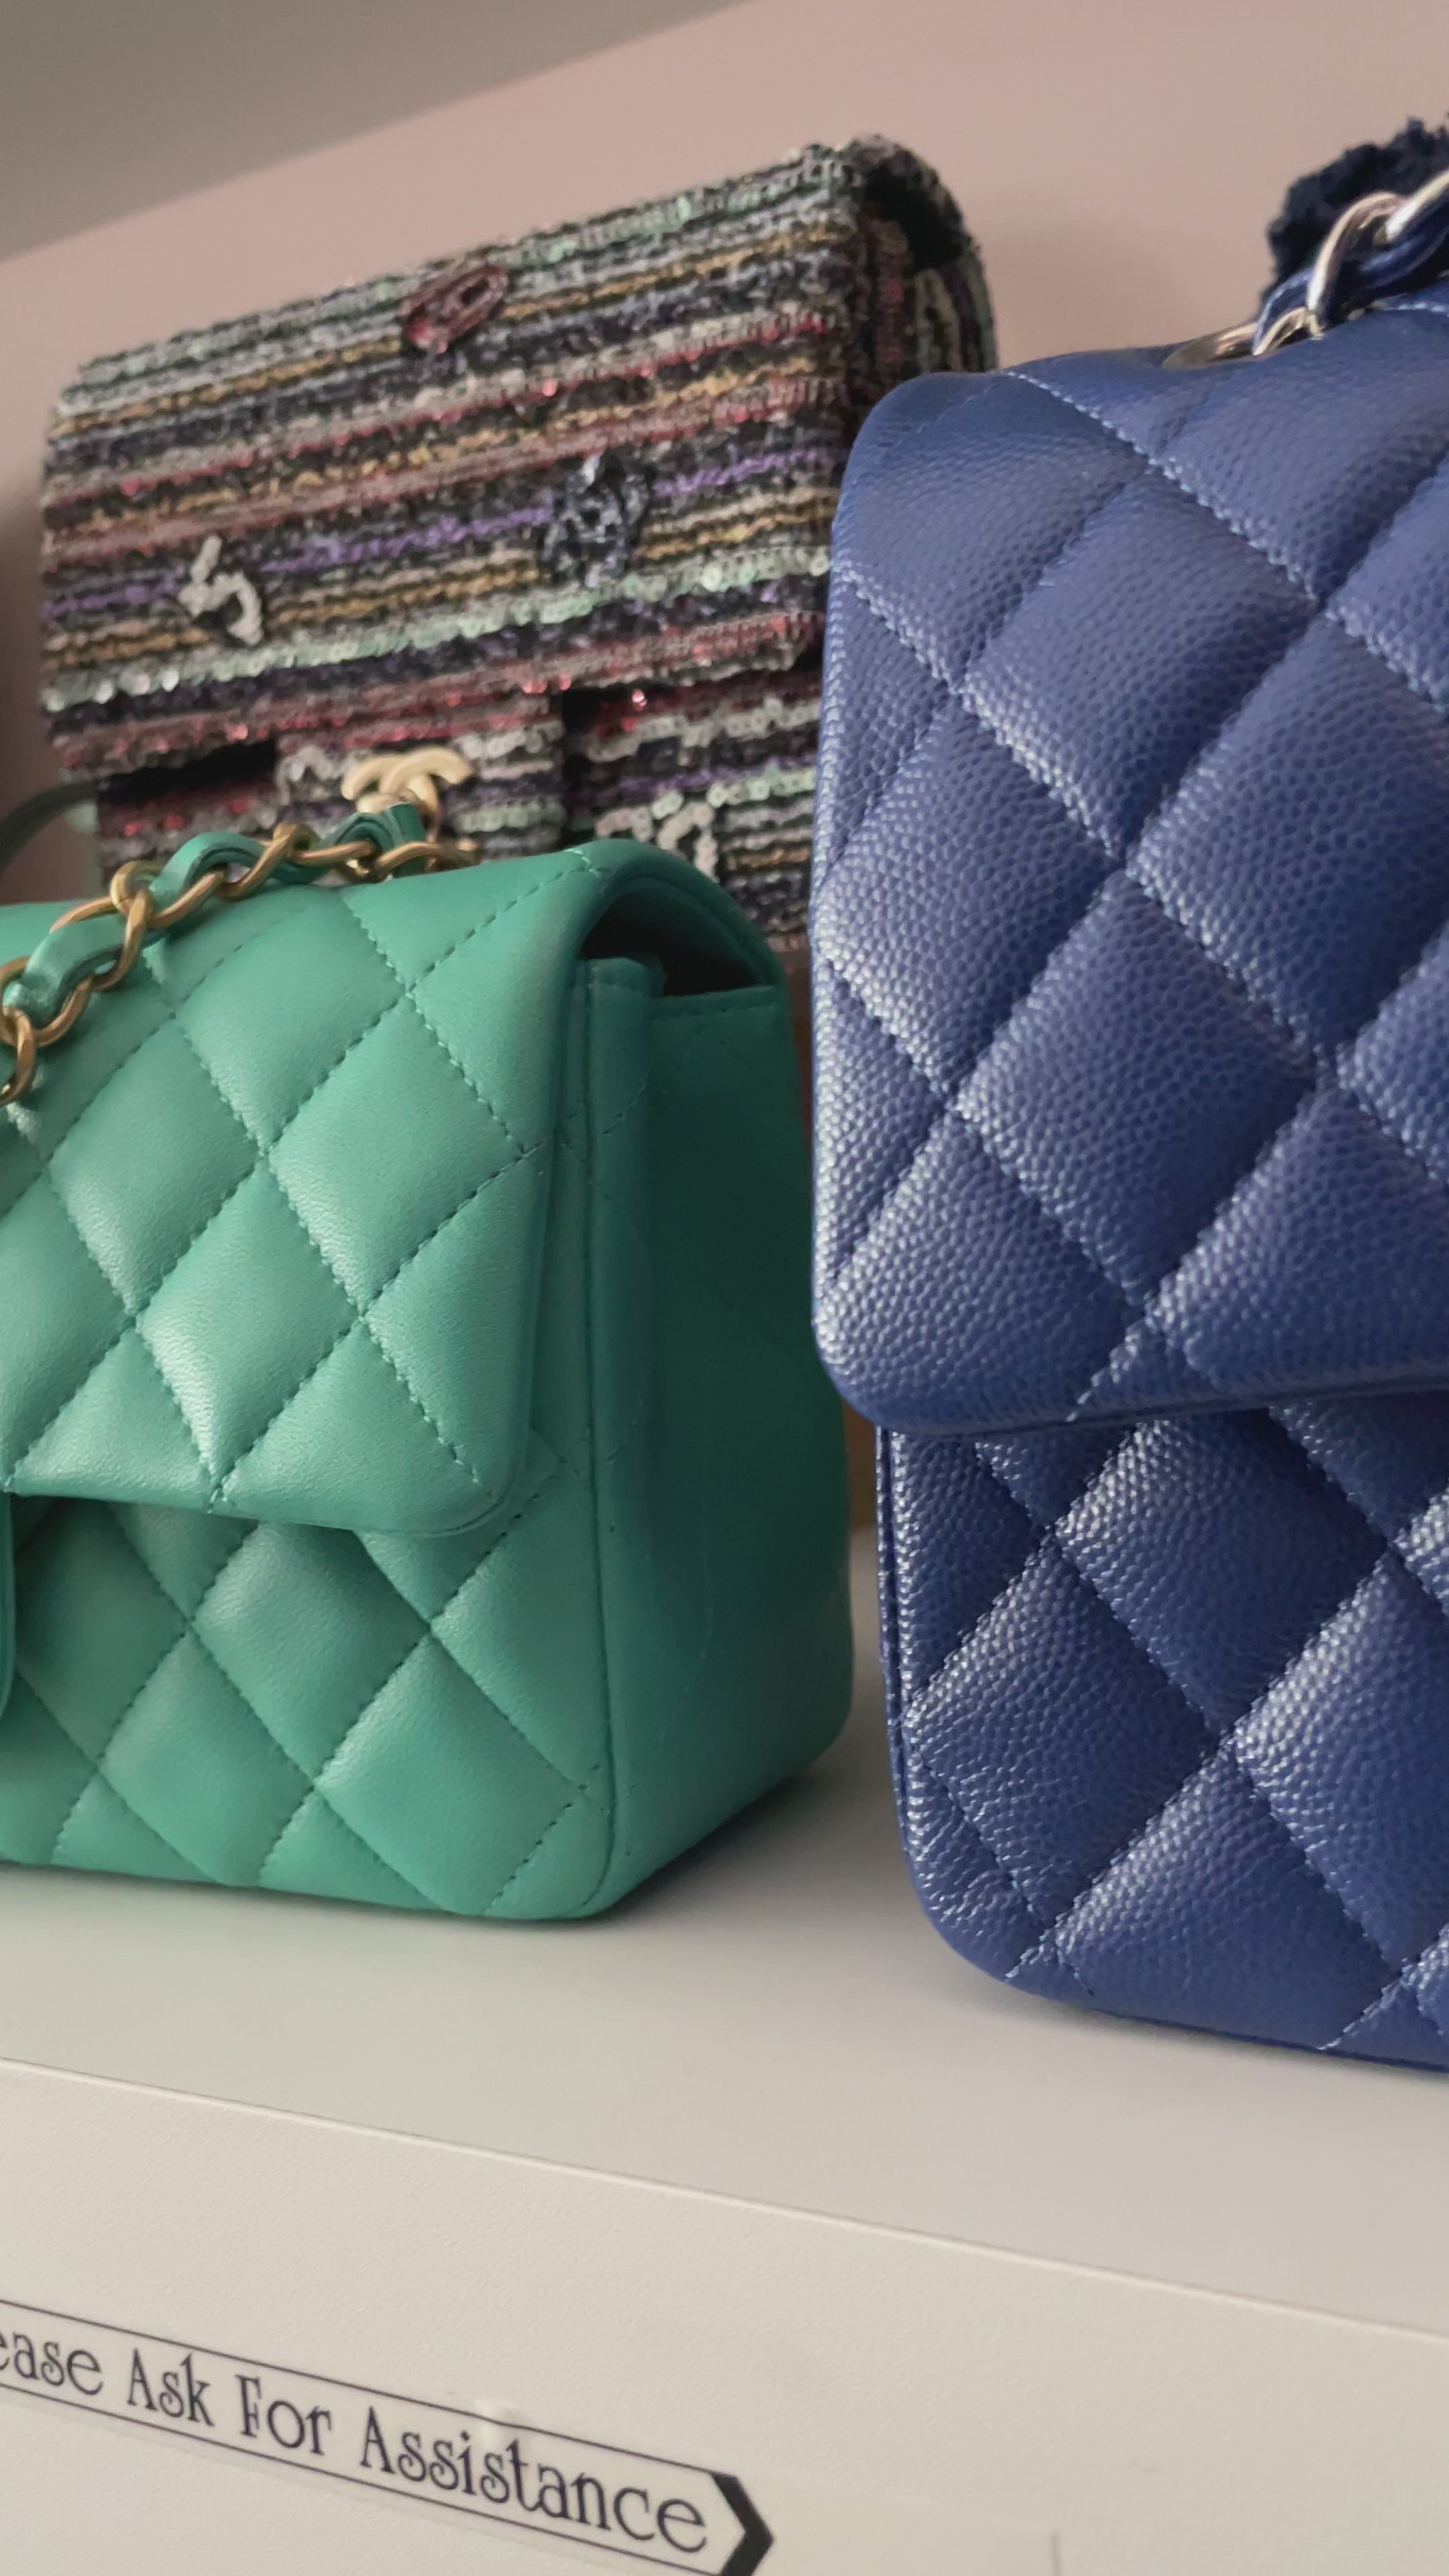 Chanel Blue Quilted Caviar Leather Mini Square Classic Flap Bag at